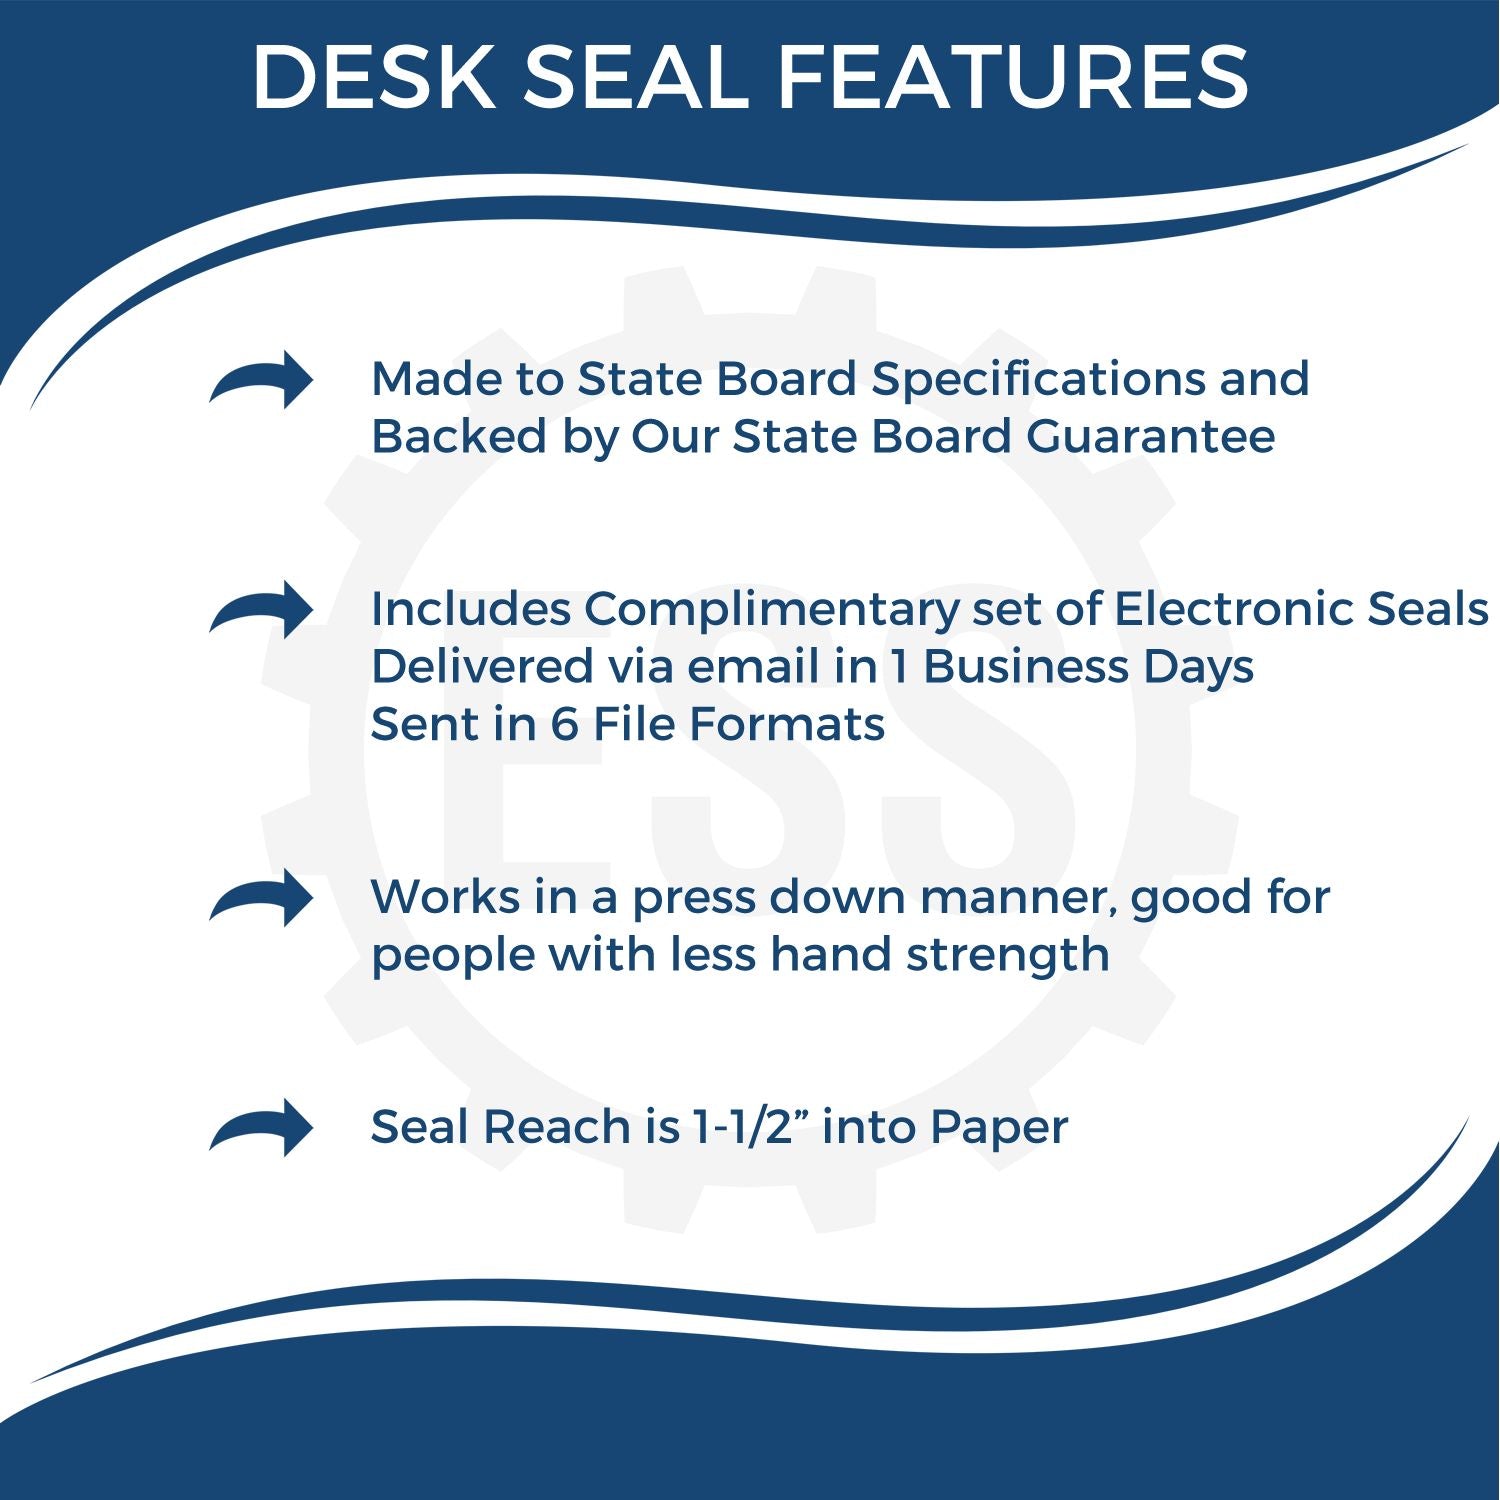 A picture of an infographic highlighting the selling points for the Colorado Engineer Desk Seal